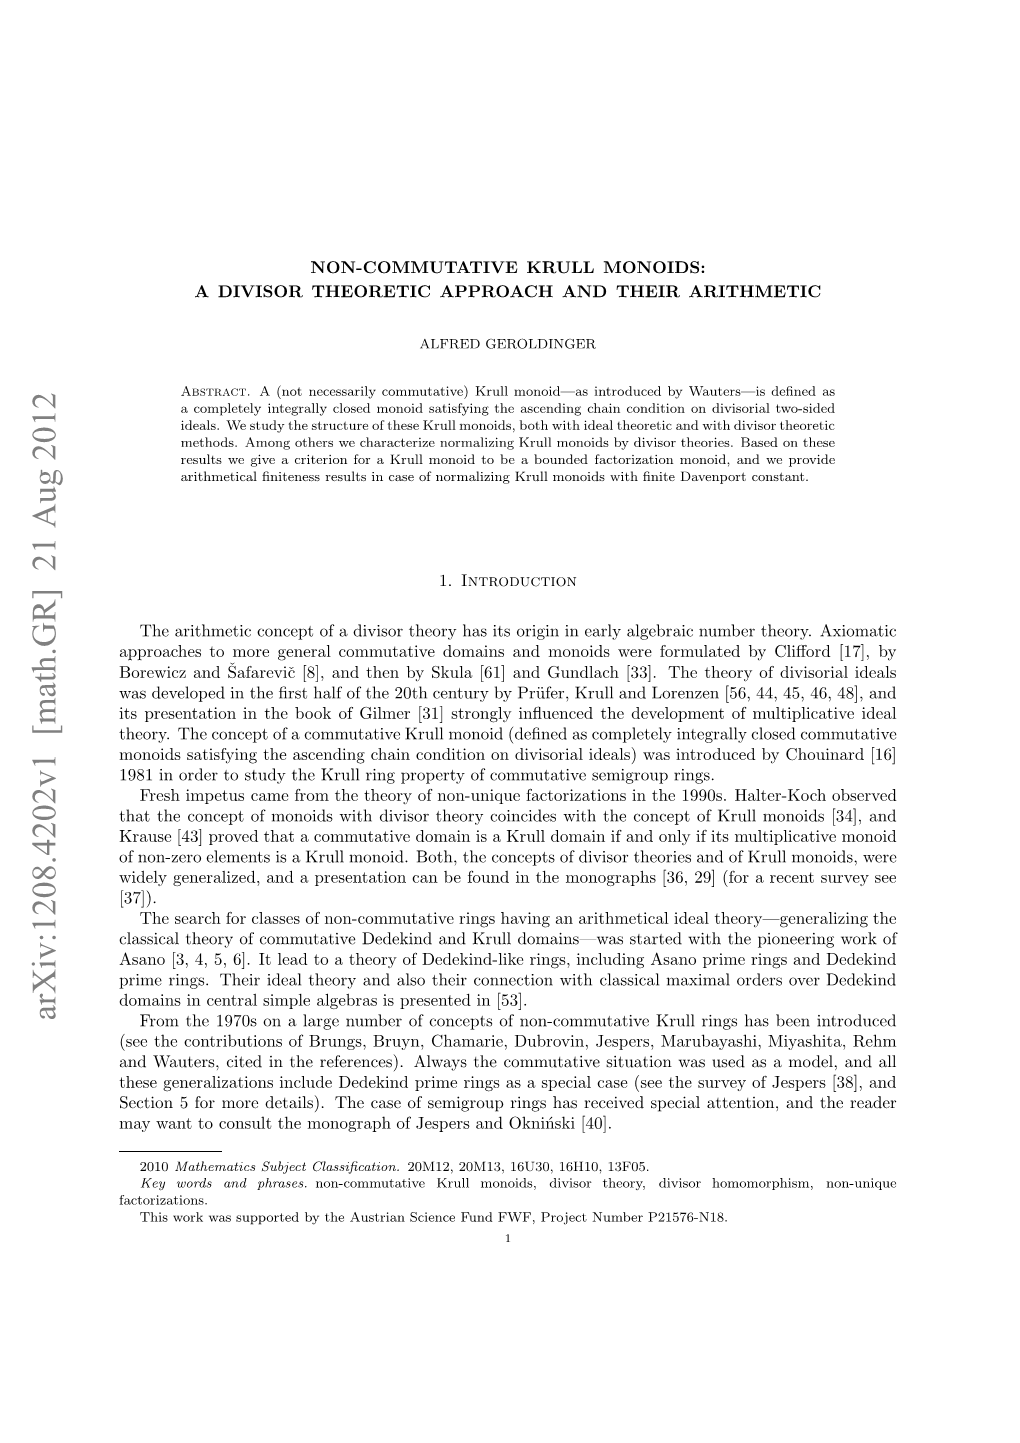 Non-Commutative Krull Monoids: a Divisor Theoretic Approach and Their